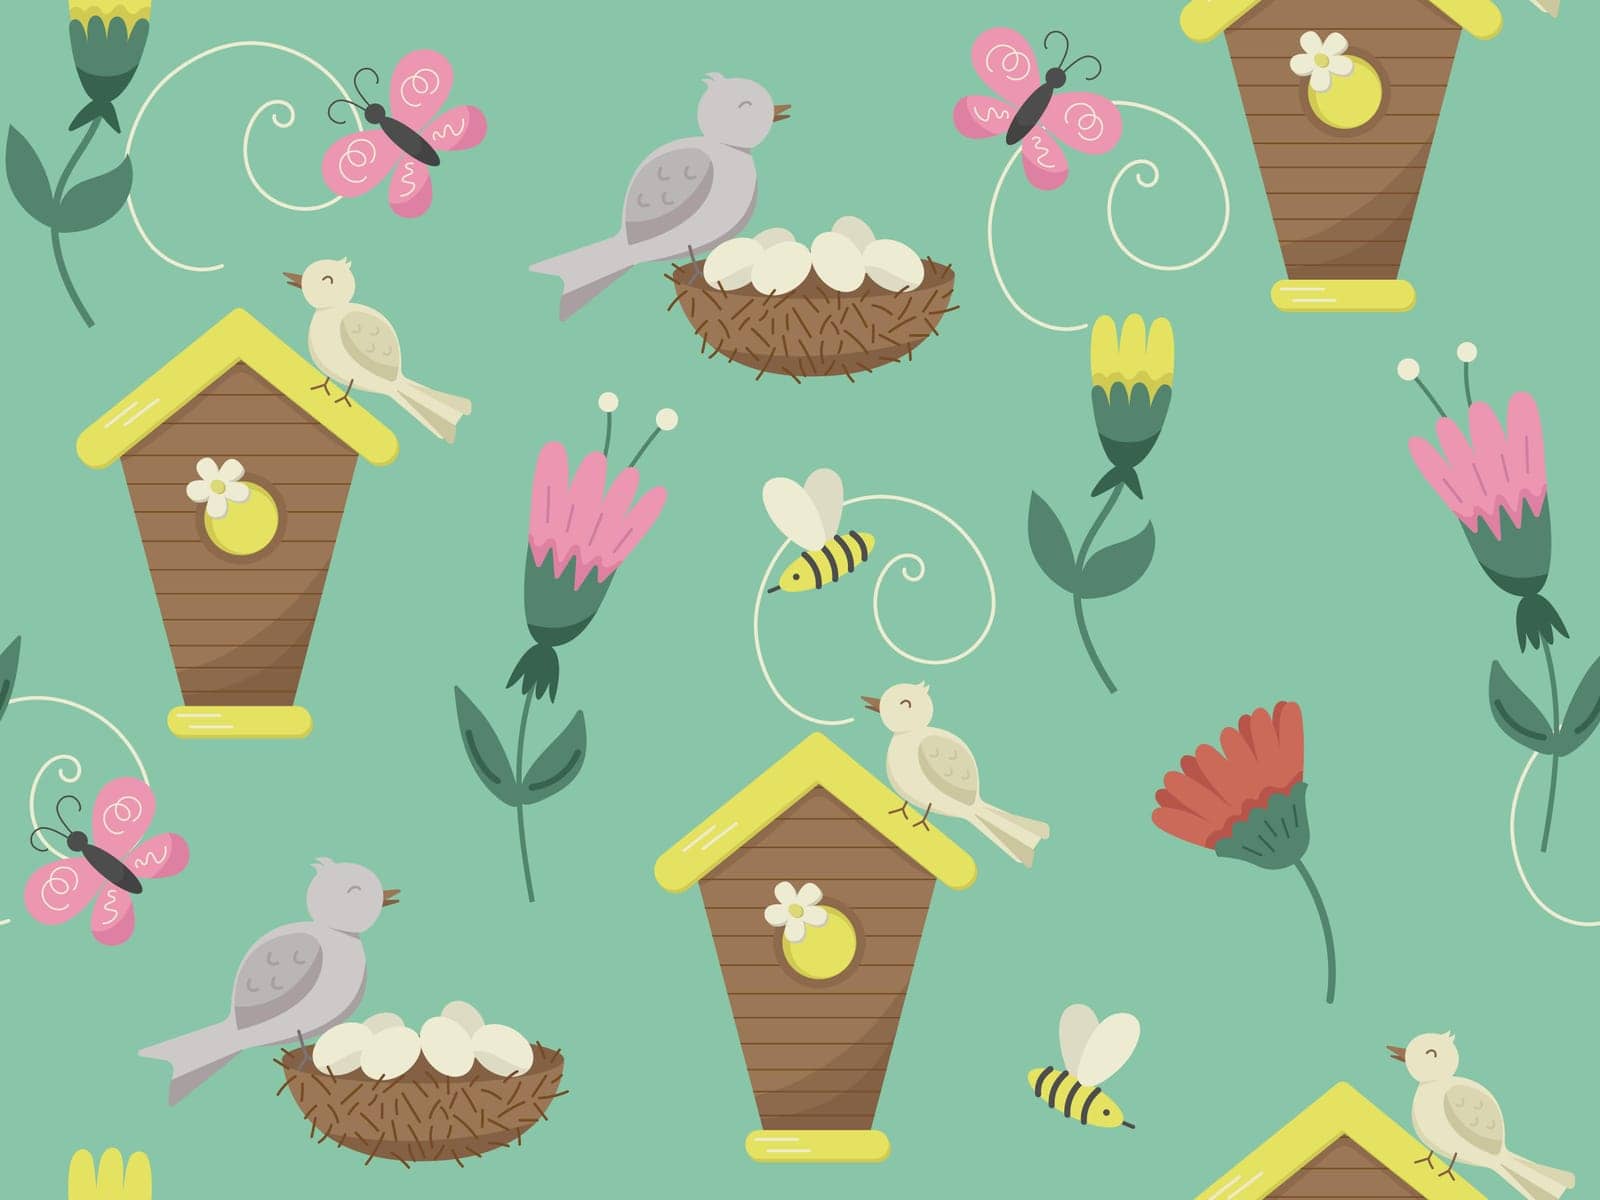 Cute bird houses and flowers background. Vector cartoon seamless pattern with bird houses and nests. Easter concept